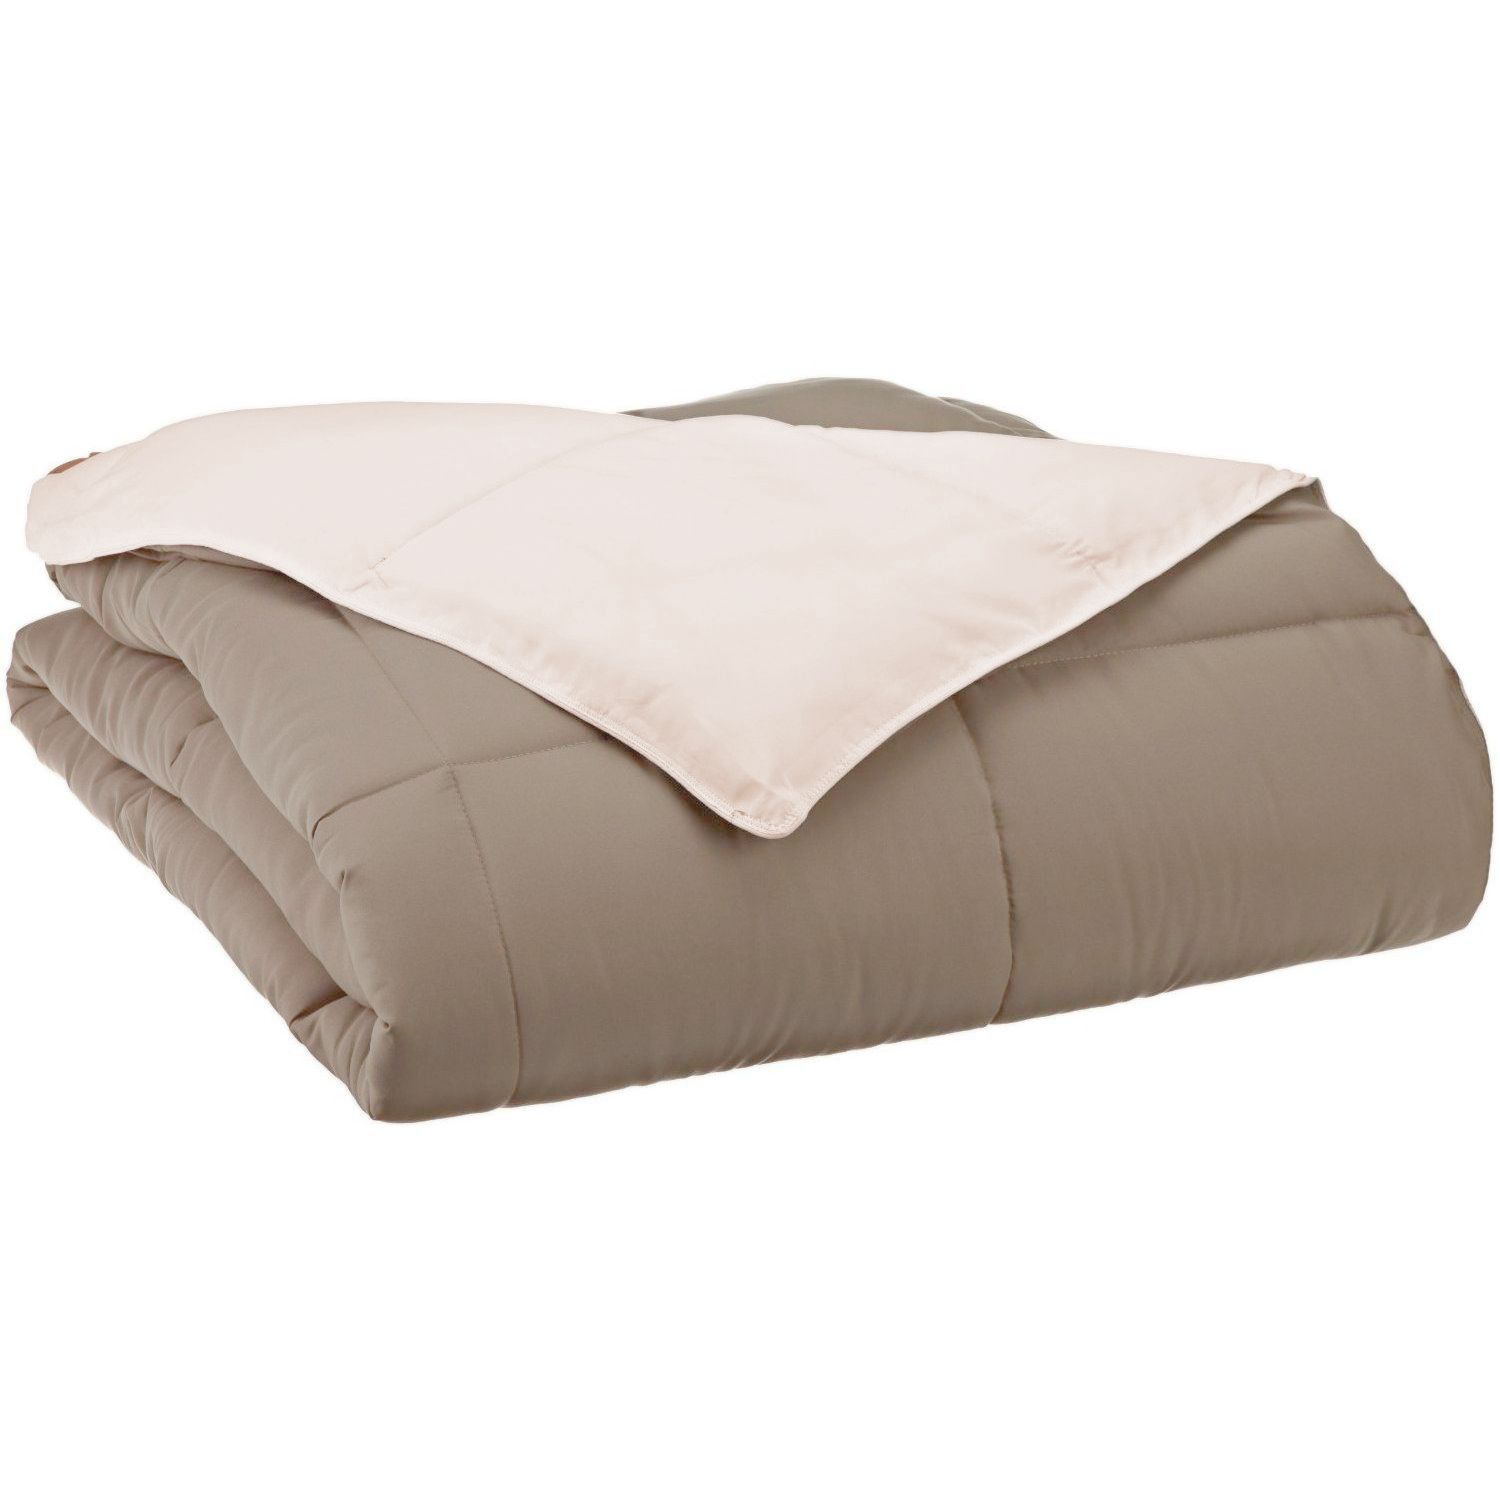 Superior Down Alternative Reversible Comforter, Full/ Queen, Ivory/ Taupe - image 1 of 4